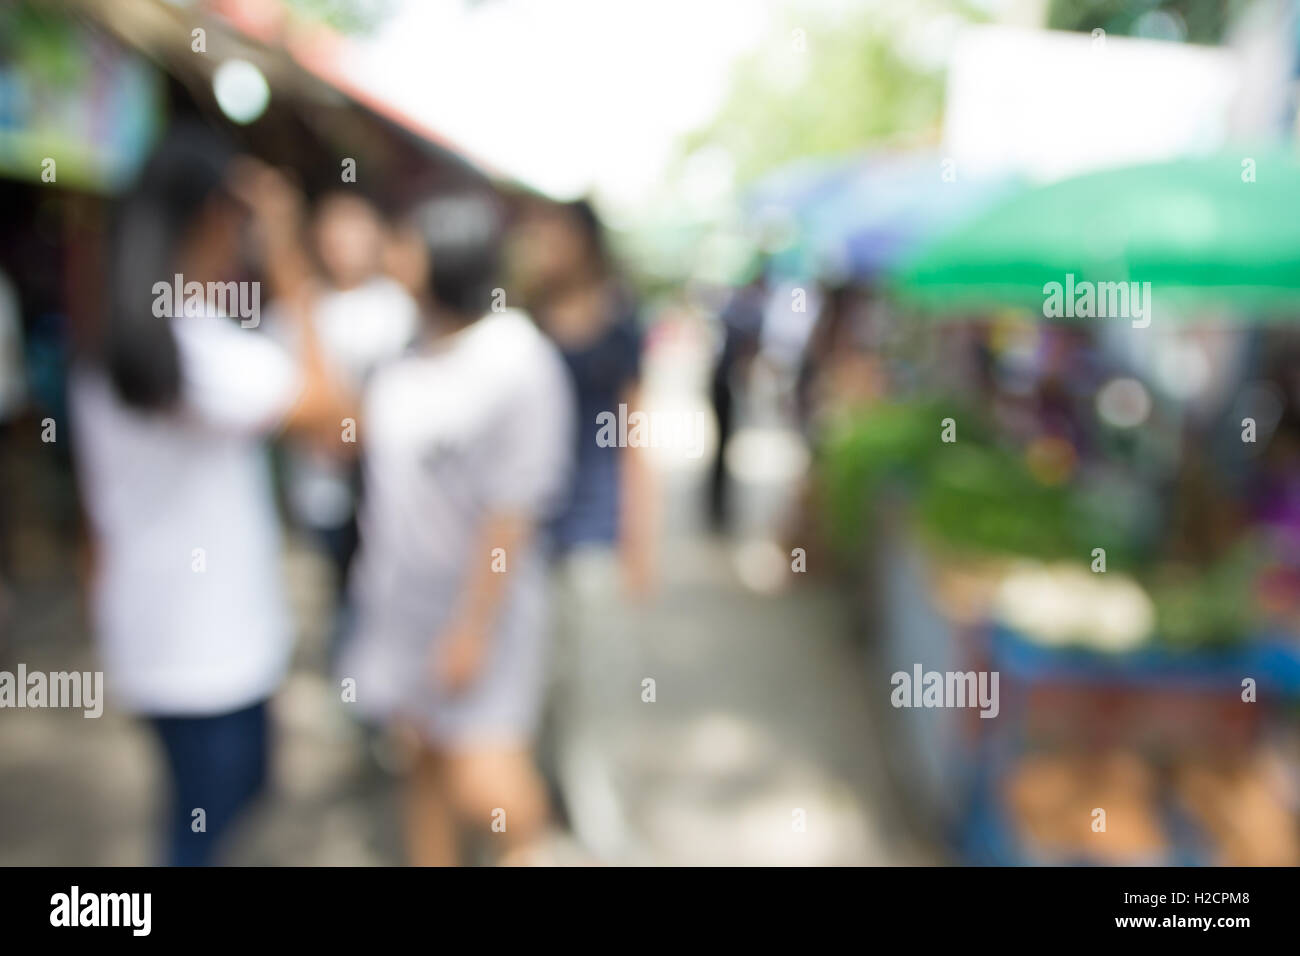 Blurred background : people shopping at market Stock Photo